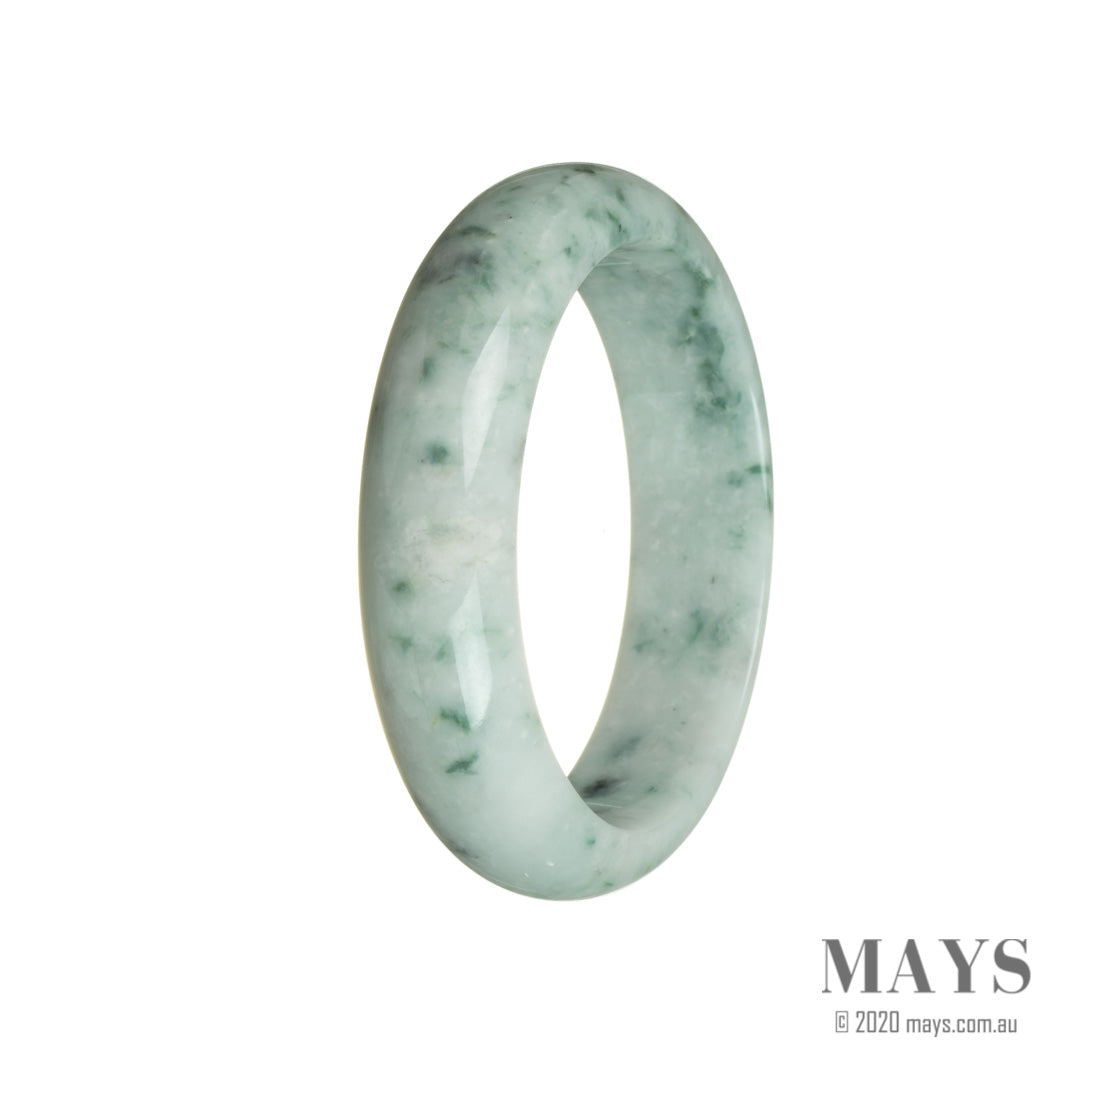 An elegant white jade bangle bracelet with a grade A quality. The bracelet features a half moon shape and measures 59mm in size. Perfect for adding a touch of tradition and sophistication to any outfit.